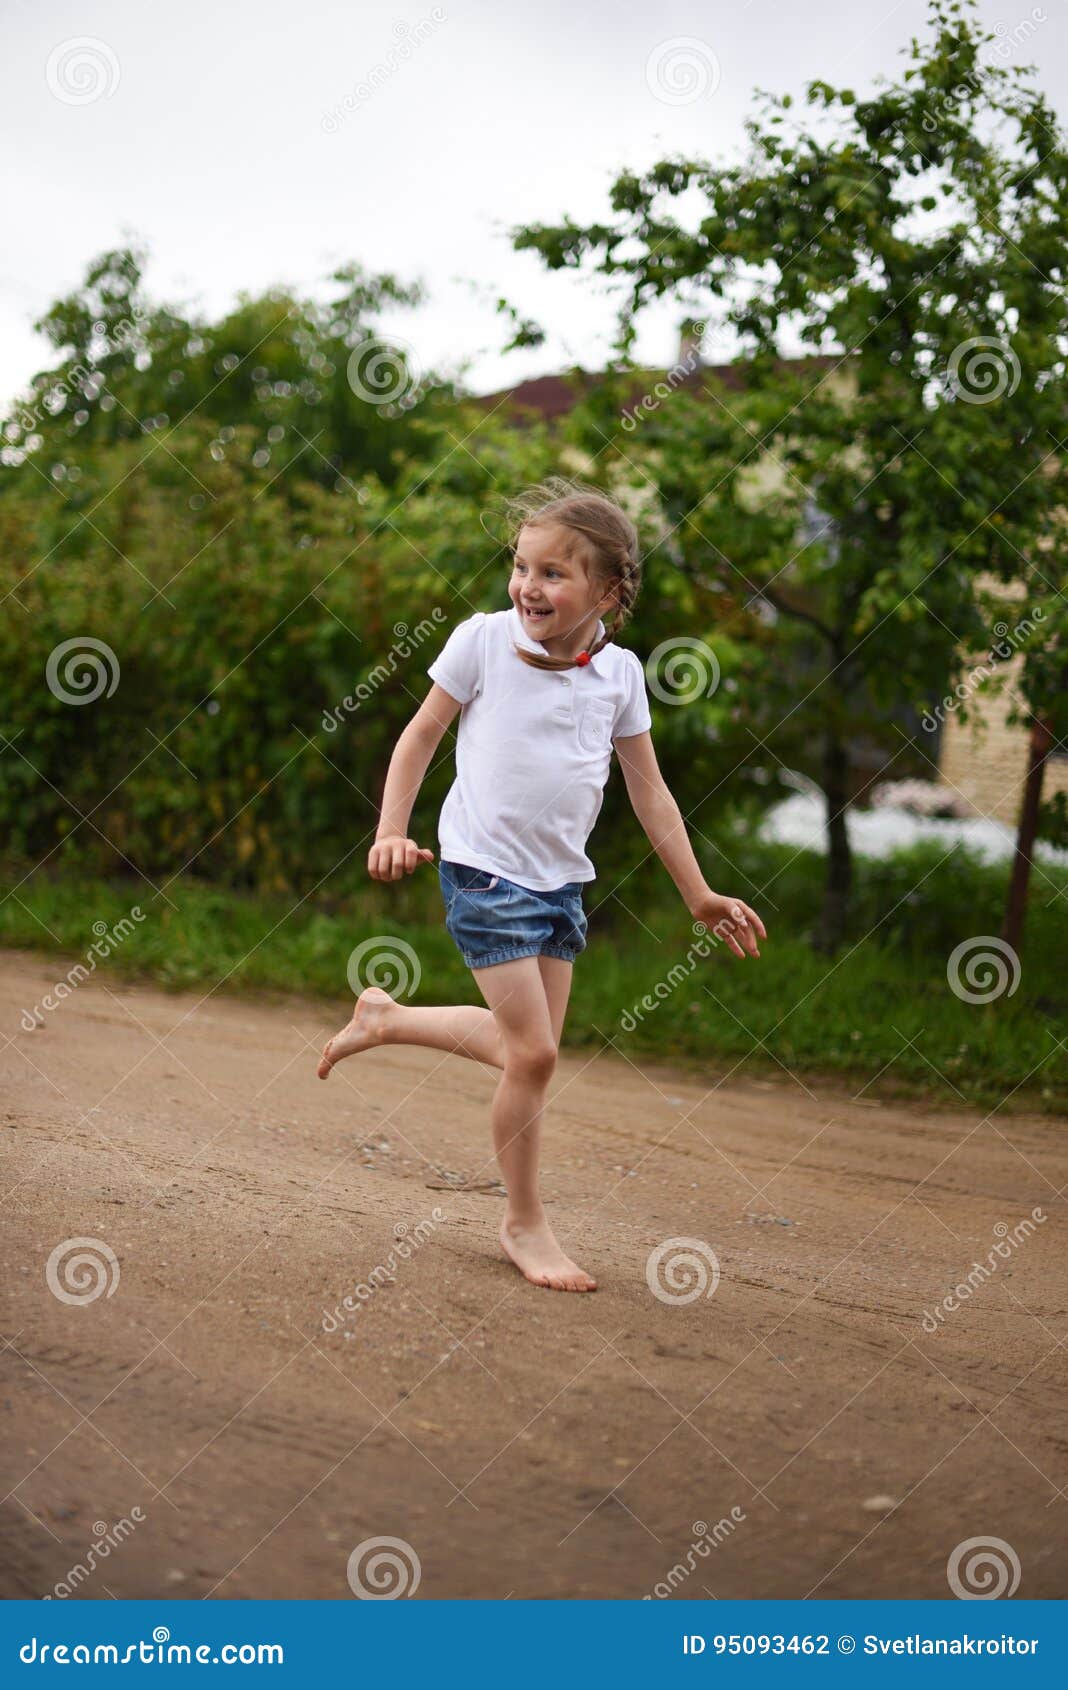 A Cute Smiling Little Girl Running Barefoot in a Countryside Landscape  Along a Country Path Stock Photo - Image of cute, field: 95093462